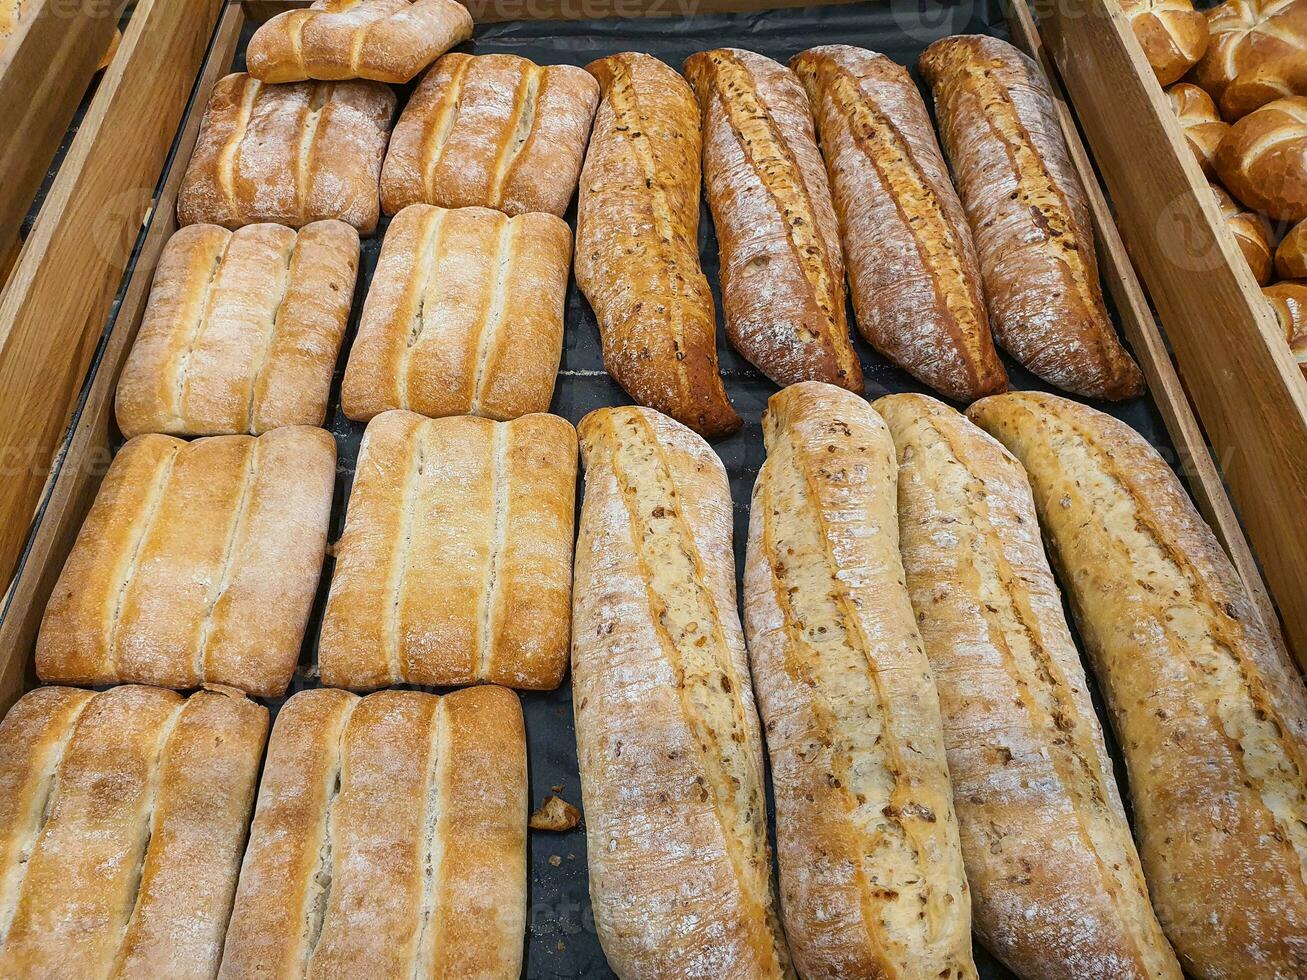 Different types of baguettes and buns in a bakery photo